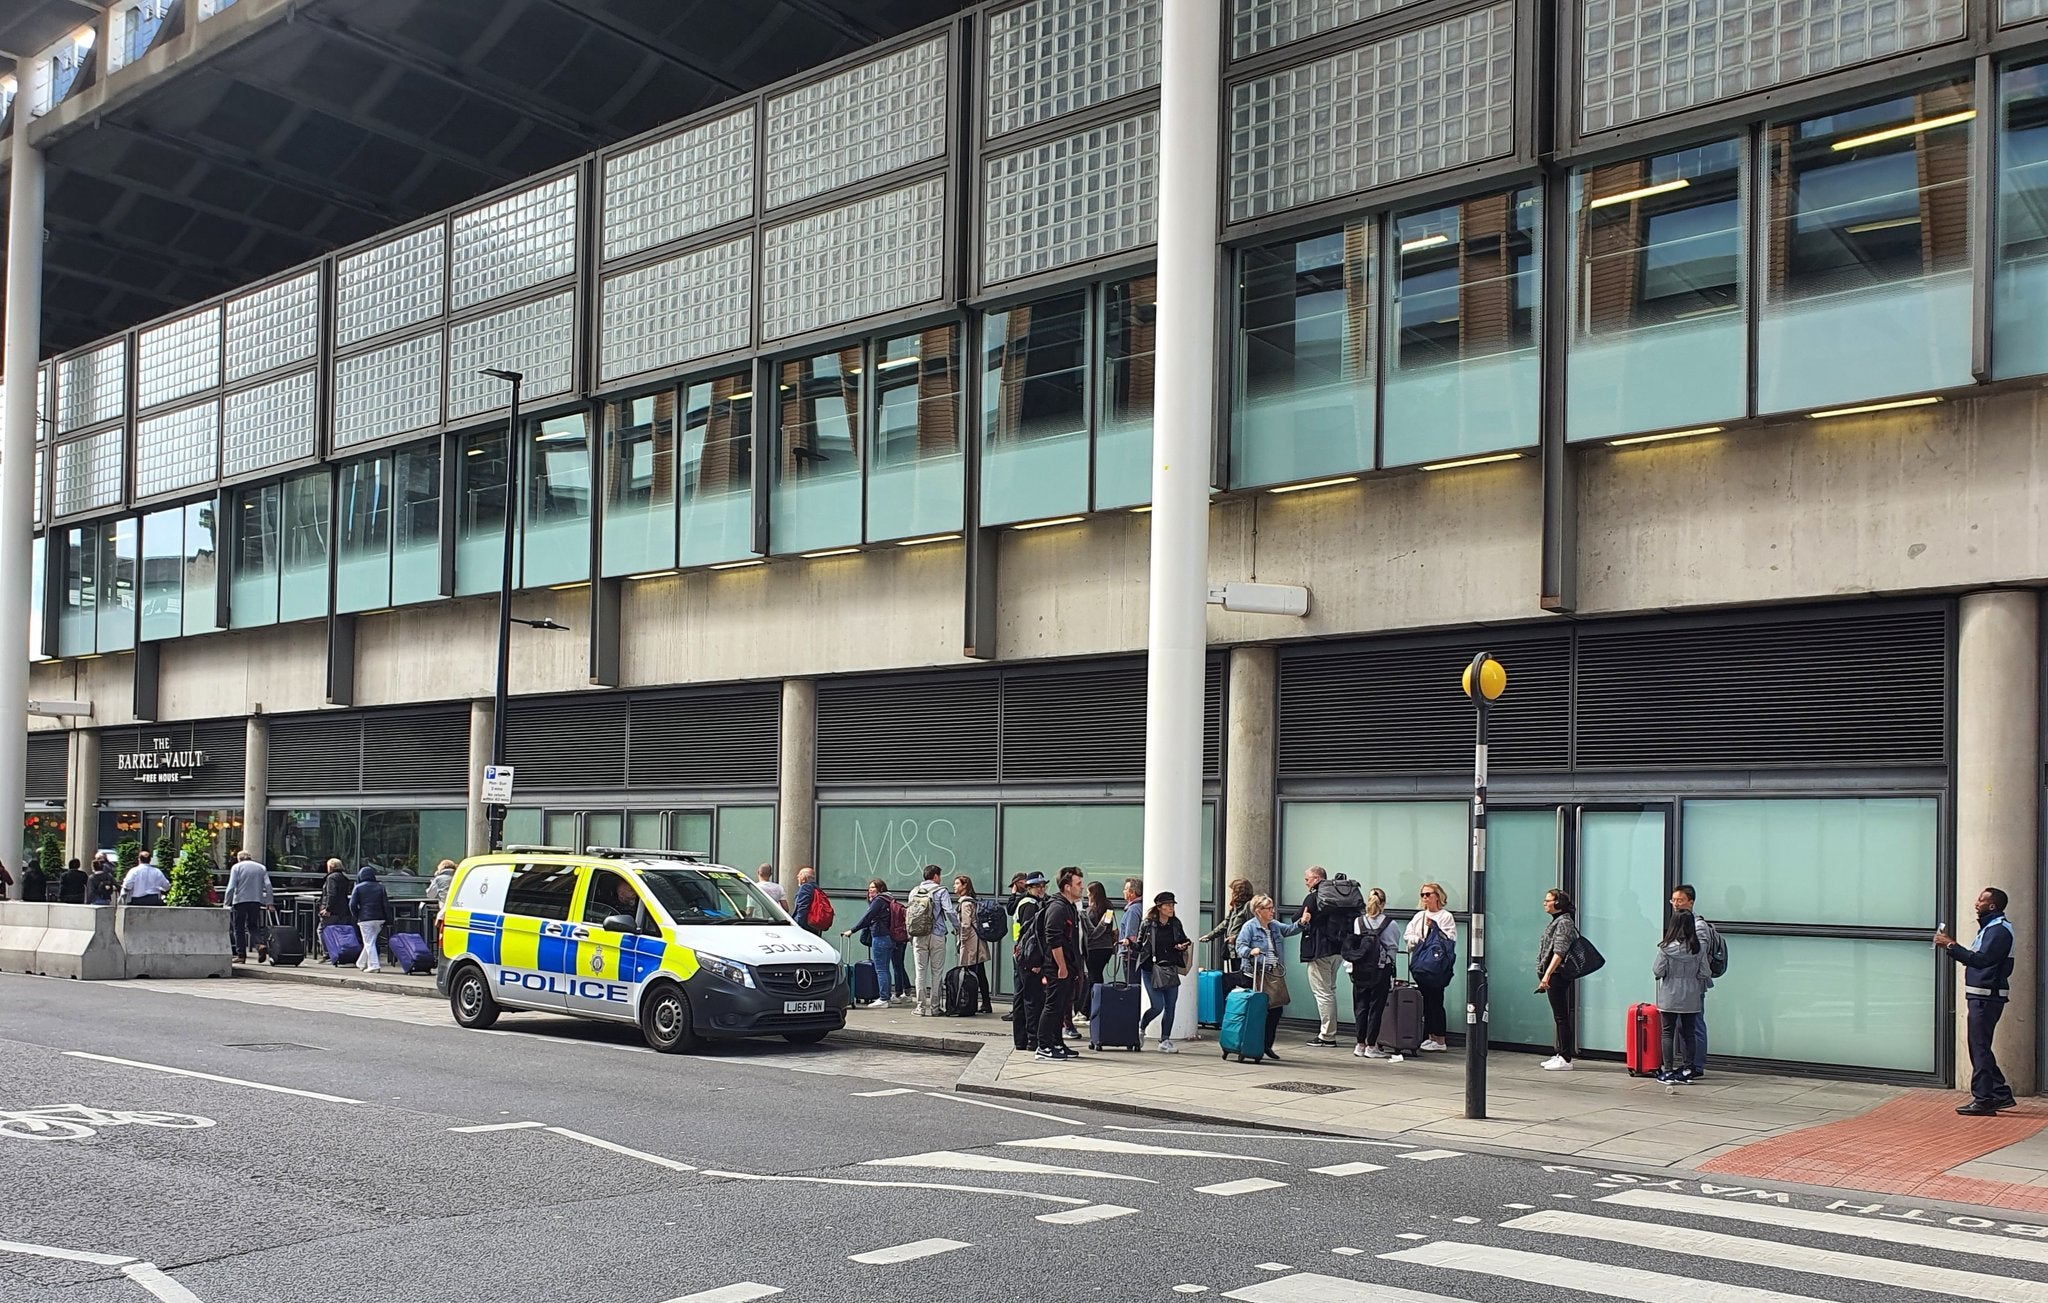 Eurostar passengers waiting outside of the terminal building on Tuesday